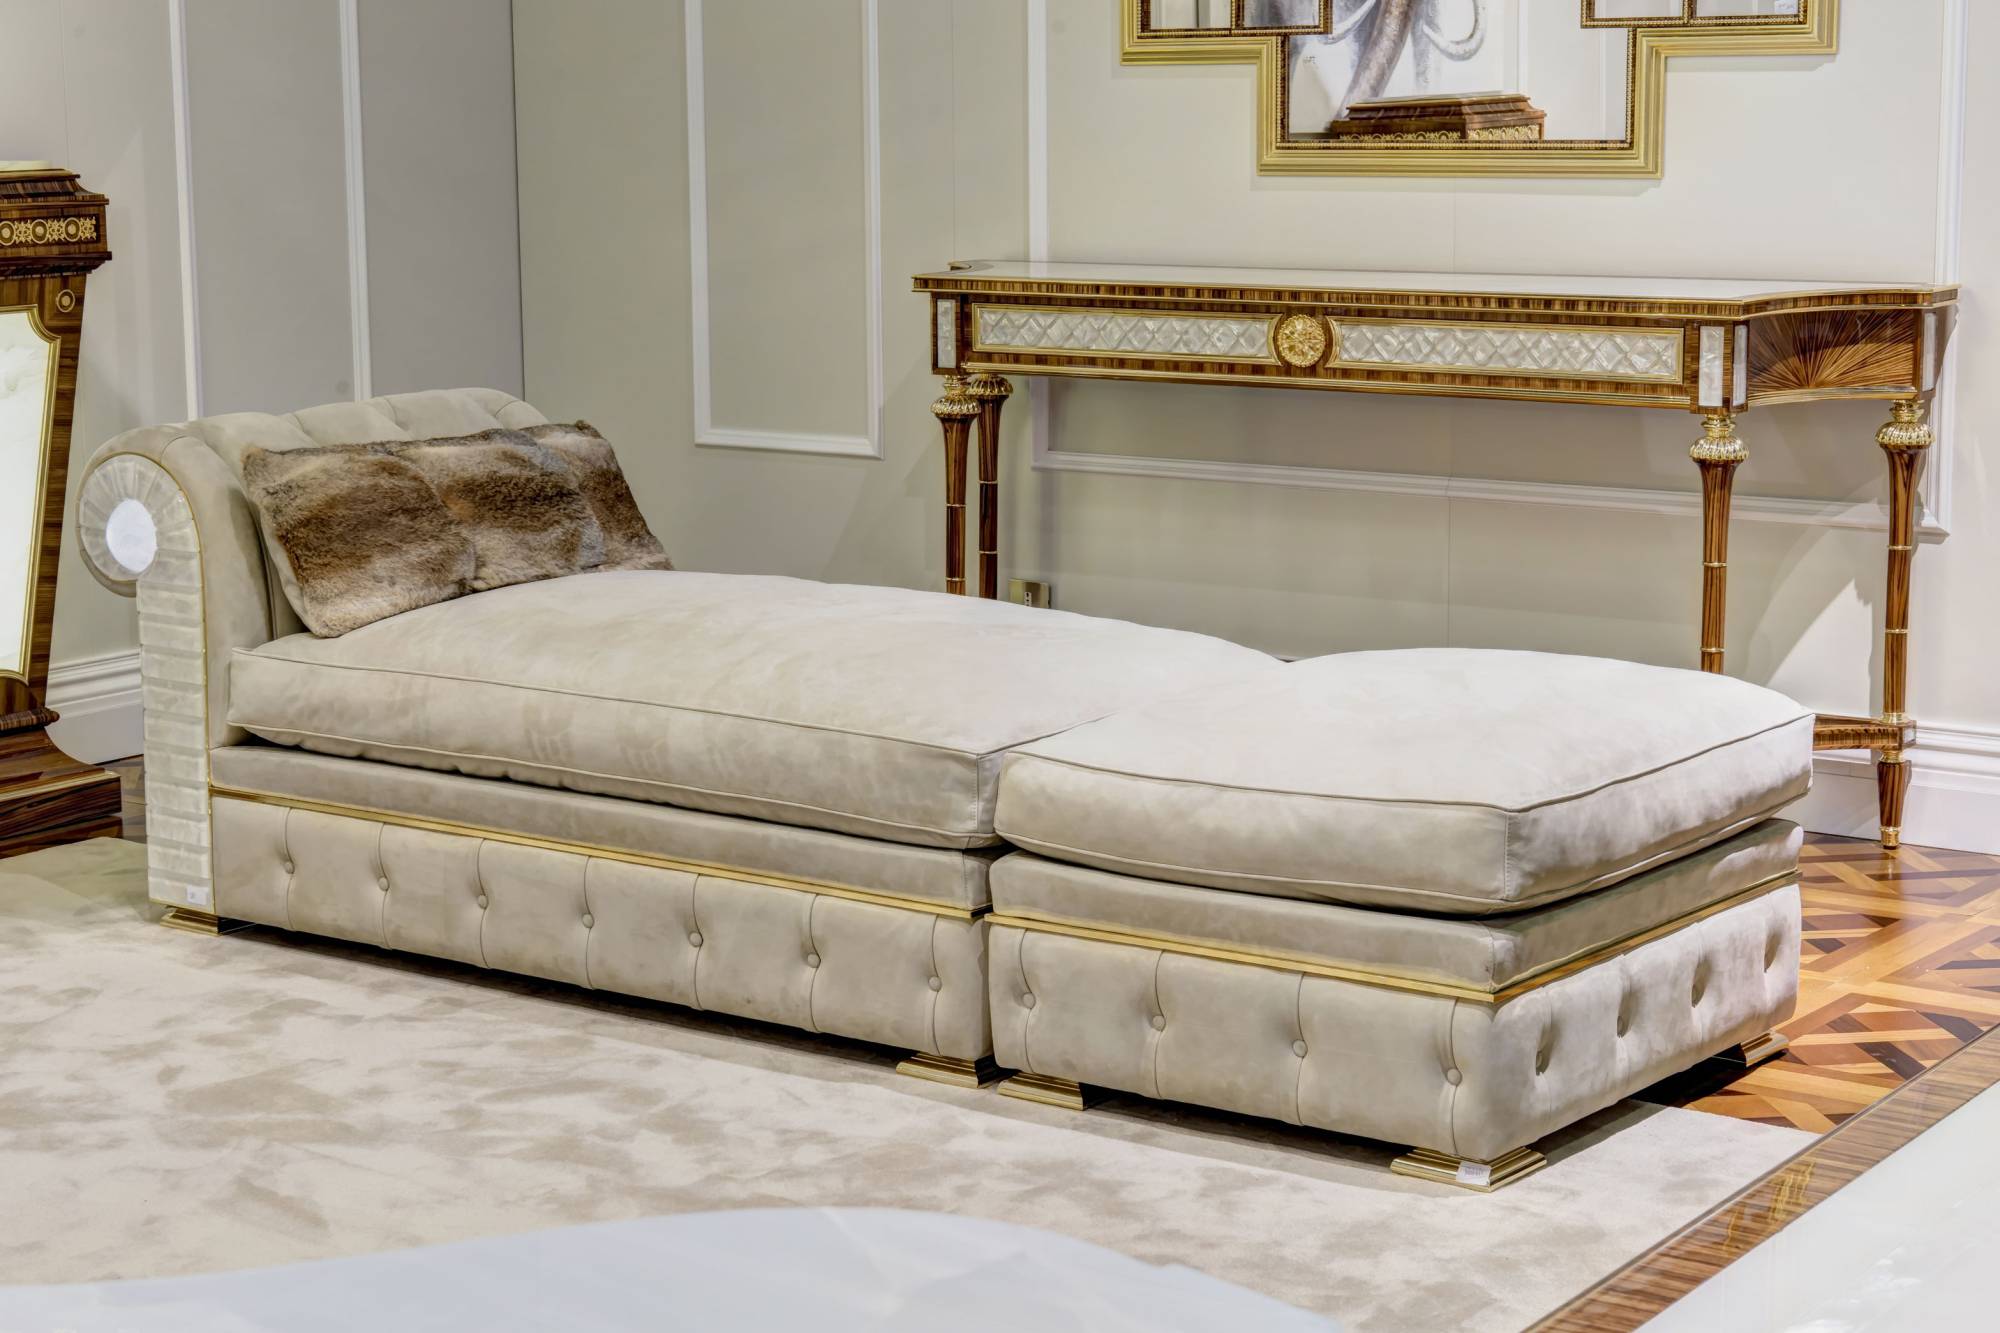 ART. 2076 – Discover the elegance of luxury classic Benches and dormeuses made in Italy by C.G. Capelletti. Luxury classic furniture that combines style and craftsmanship.